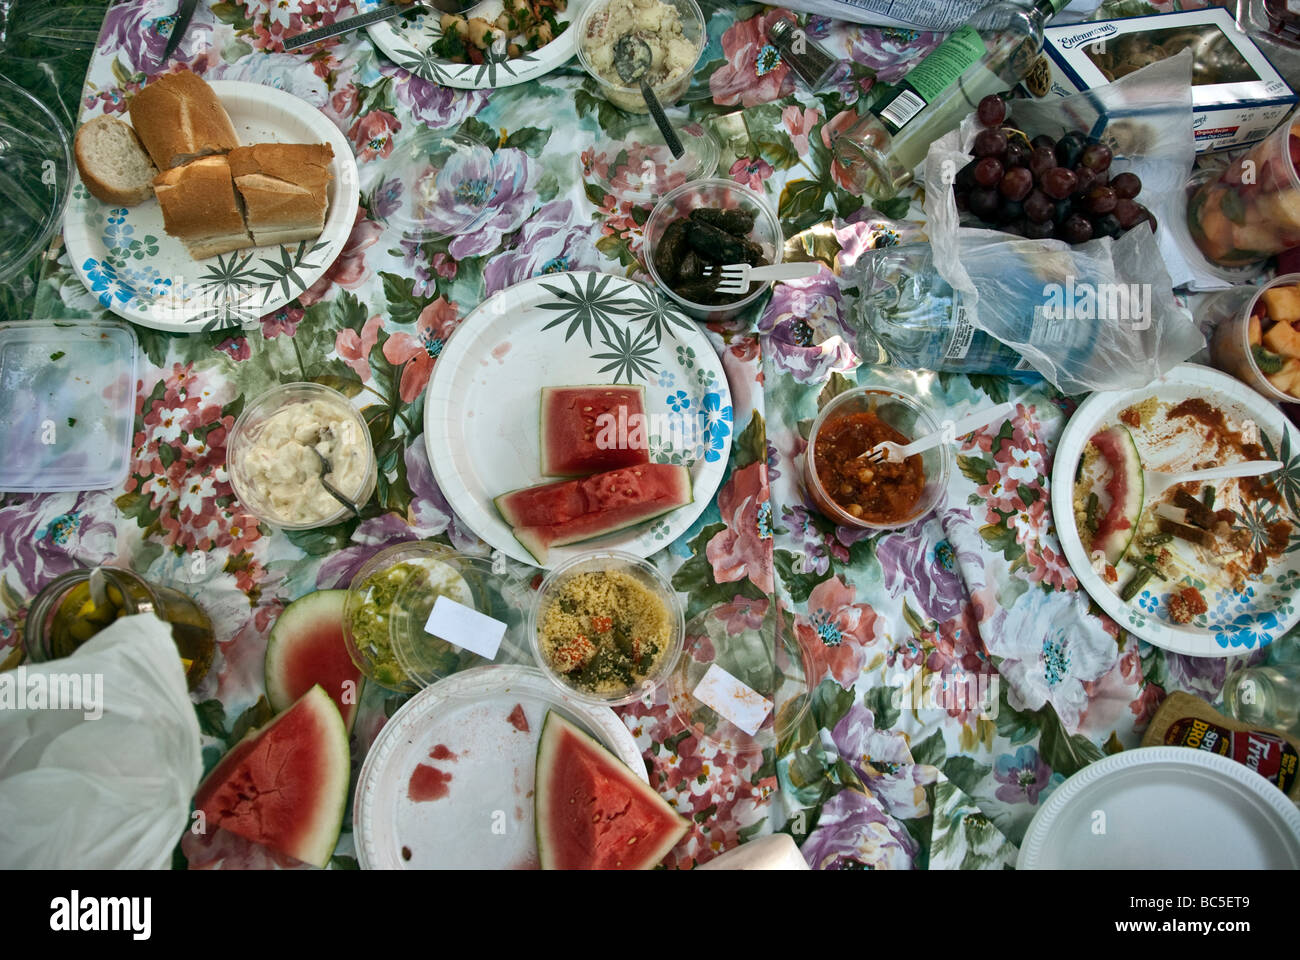 picnic food including watermelon slices, crusty bread, guacamole, olives, pickles & potato salad spread over a rose print cloth Stock Photo